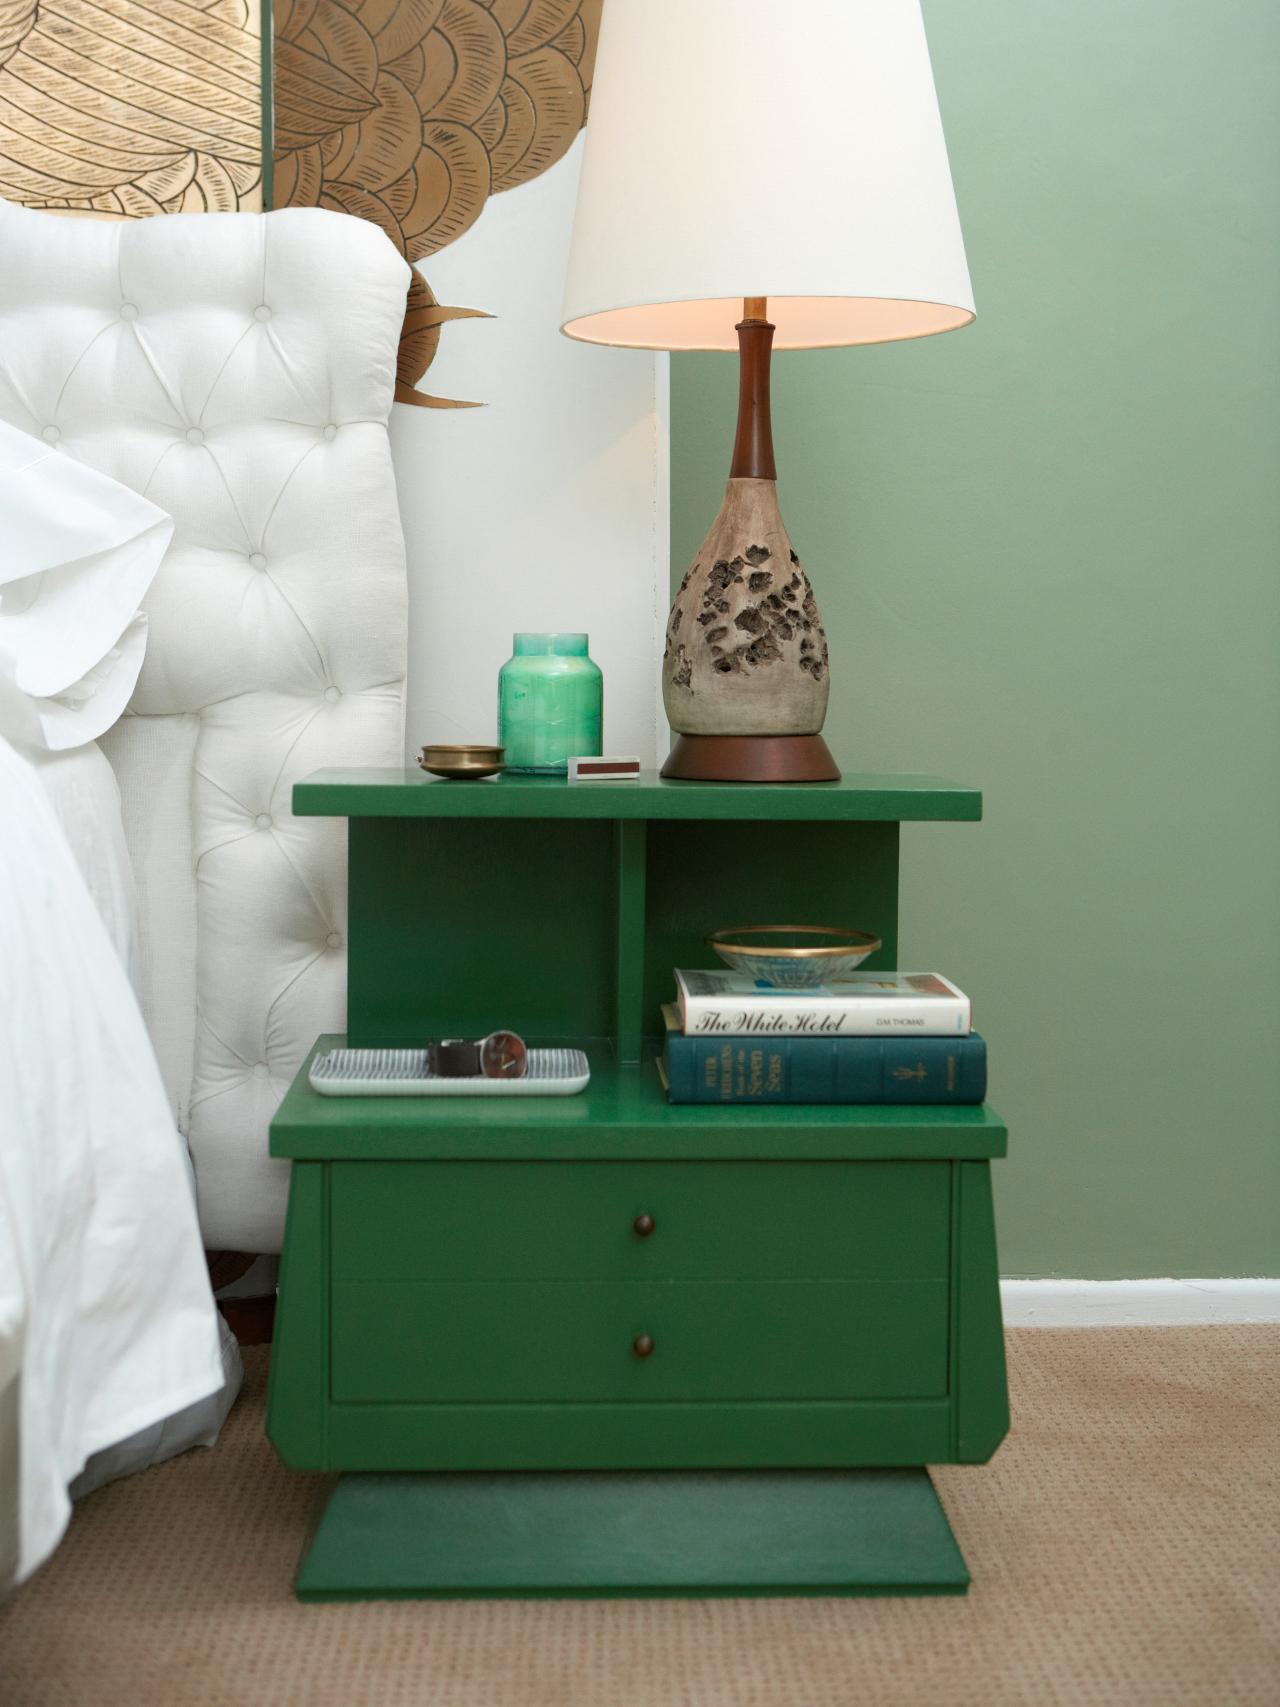 Ideas for Updating an Old Bedside Tables | DIY Home Decor and ...